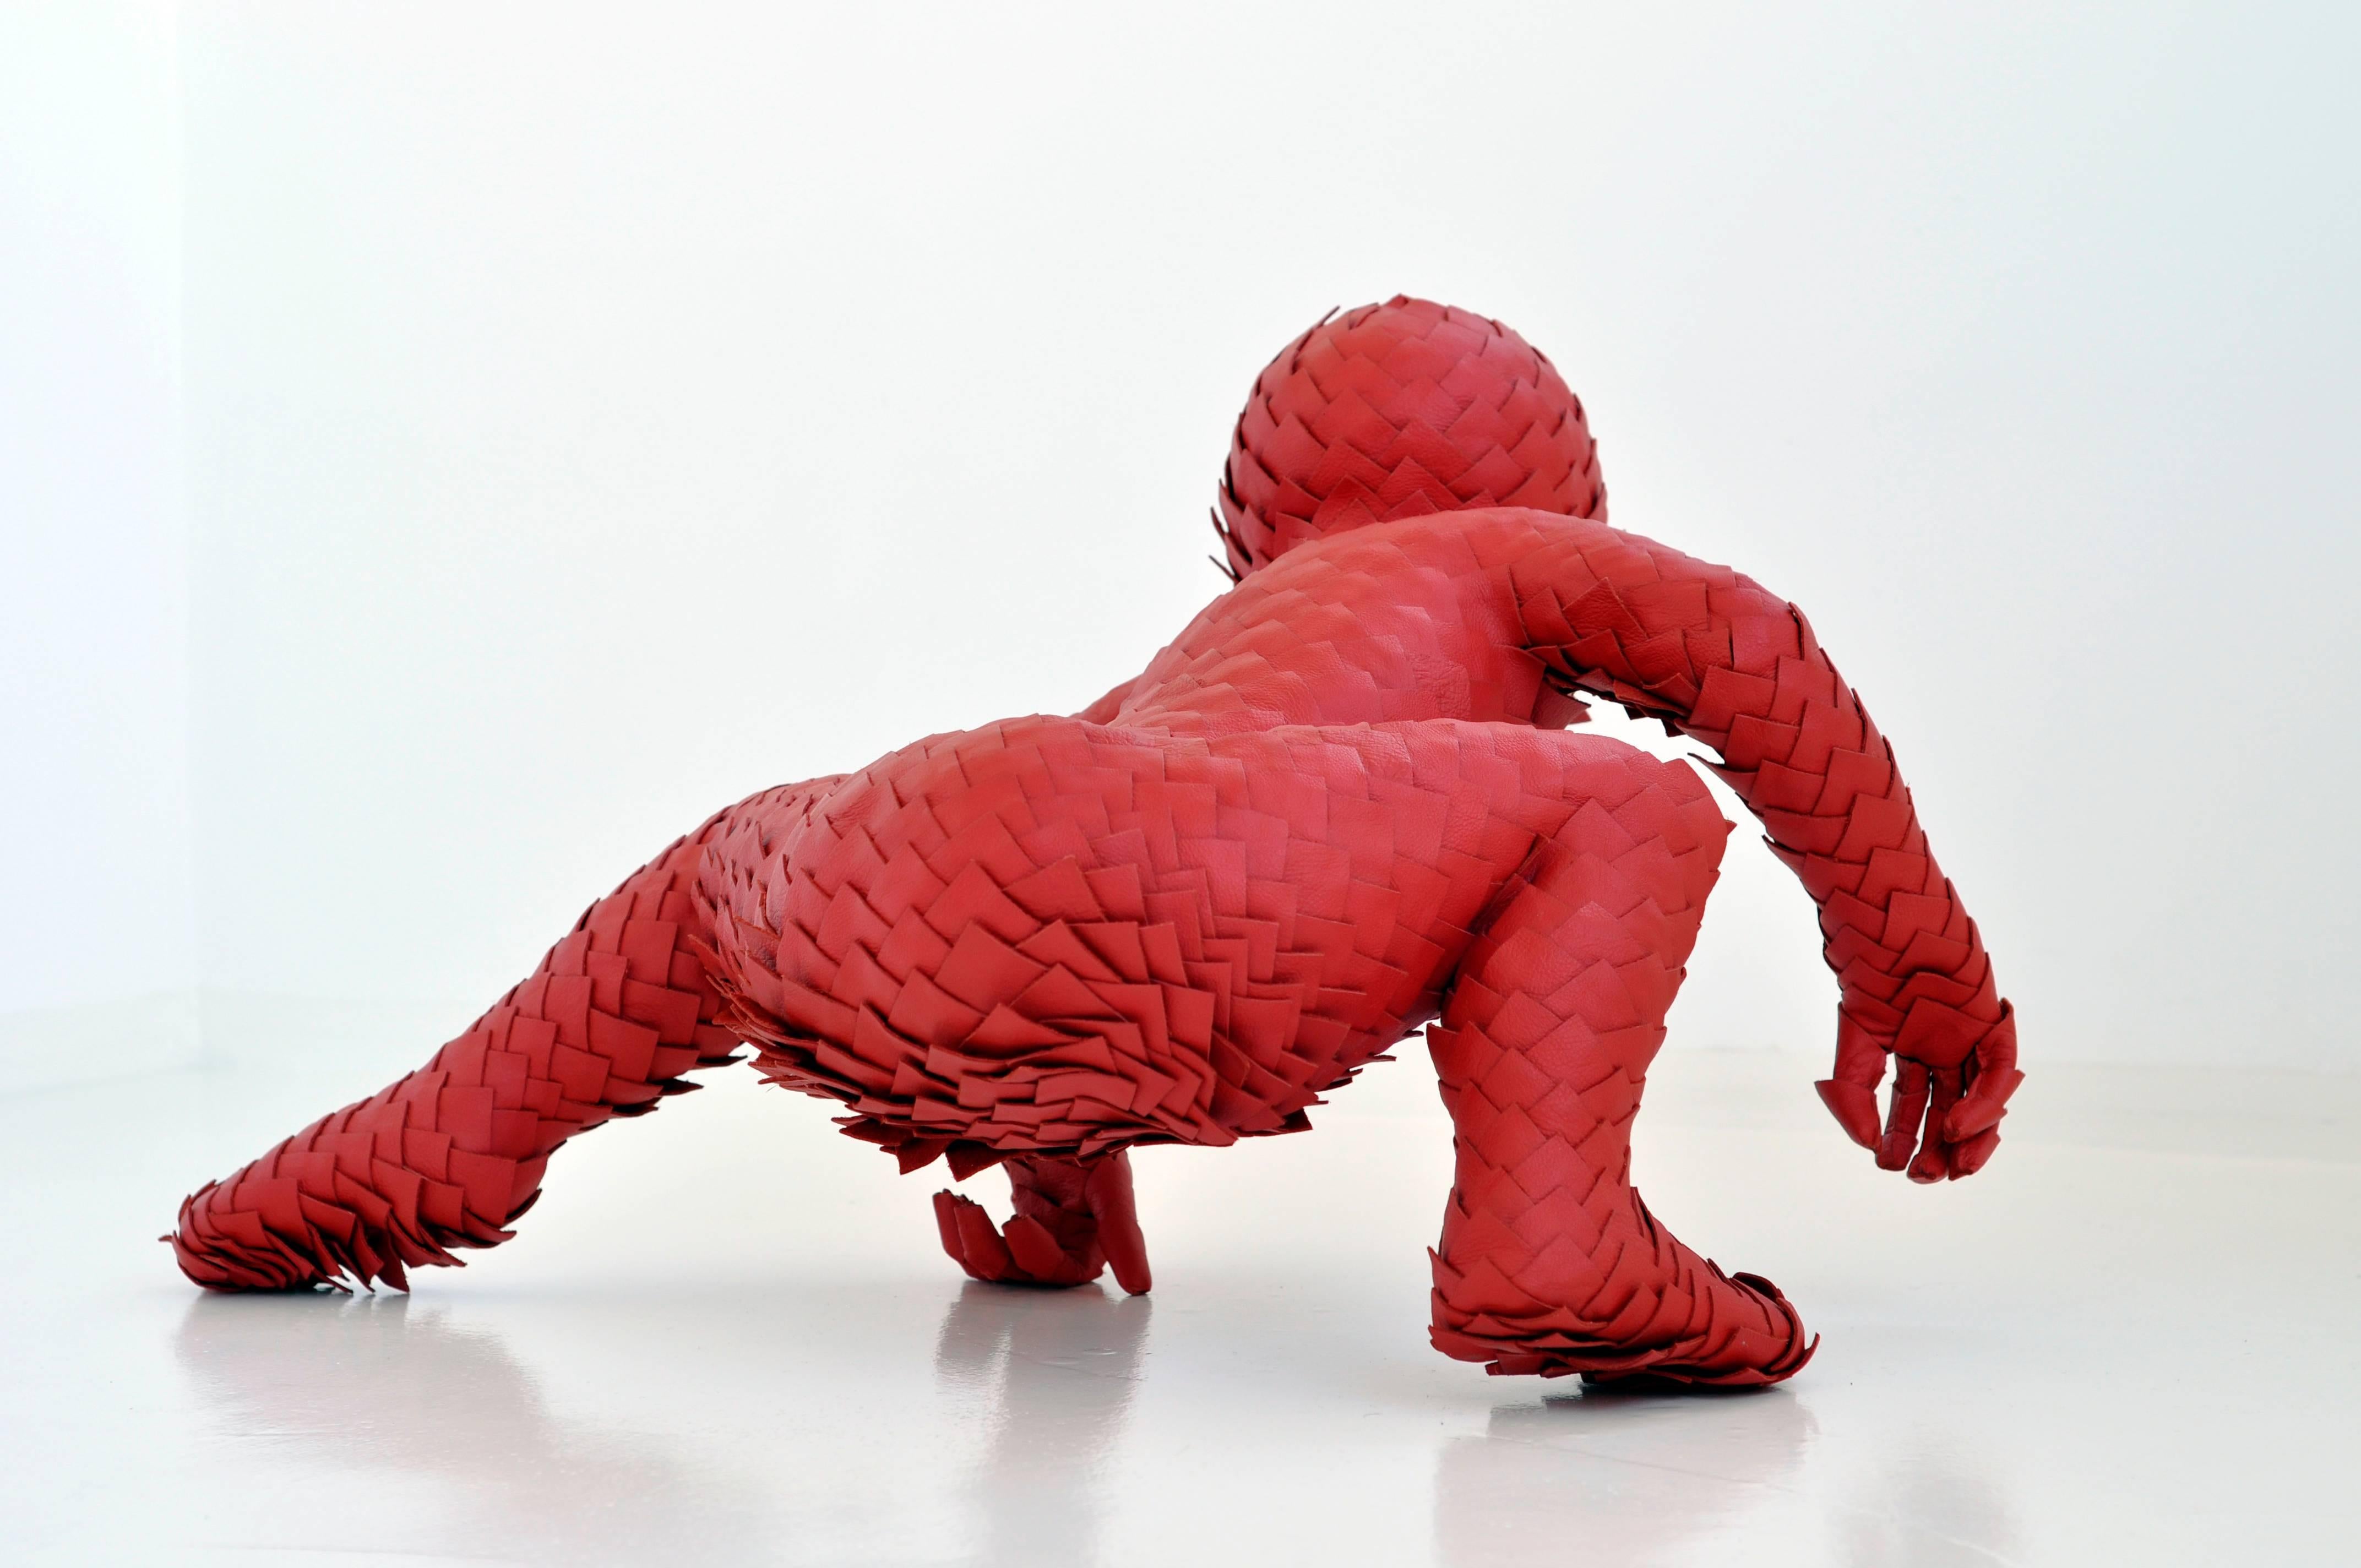 This unique red leather sculpture is entirely handcrafted. The sculptures of Sabi van Hemert are intriguing and funny and a real eye-catchers in any interior. Her sculptures usually refer to people or animals. They trigger almost immediately a